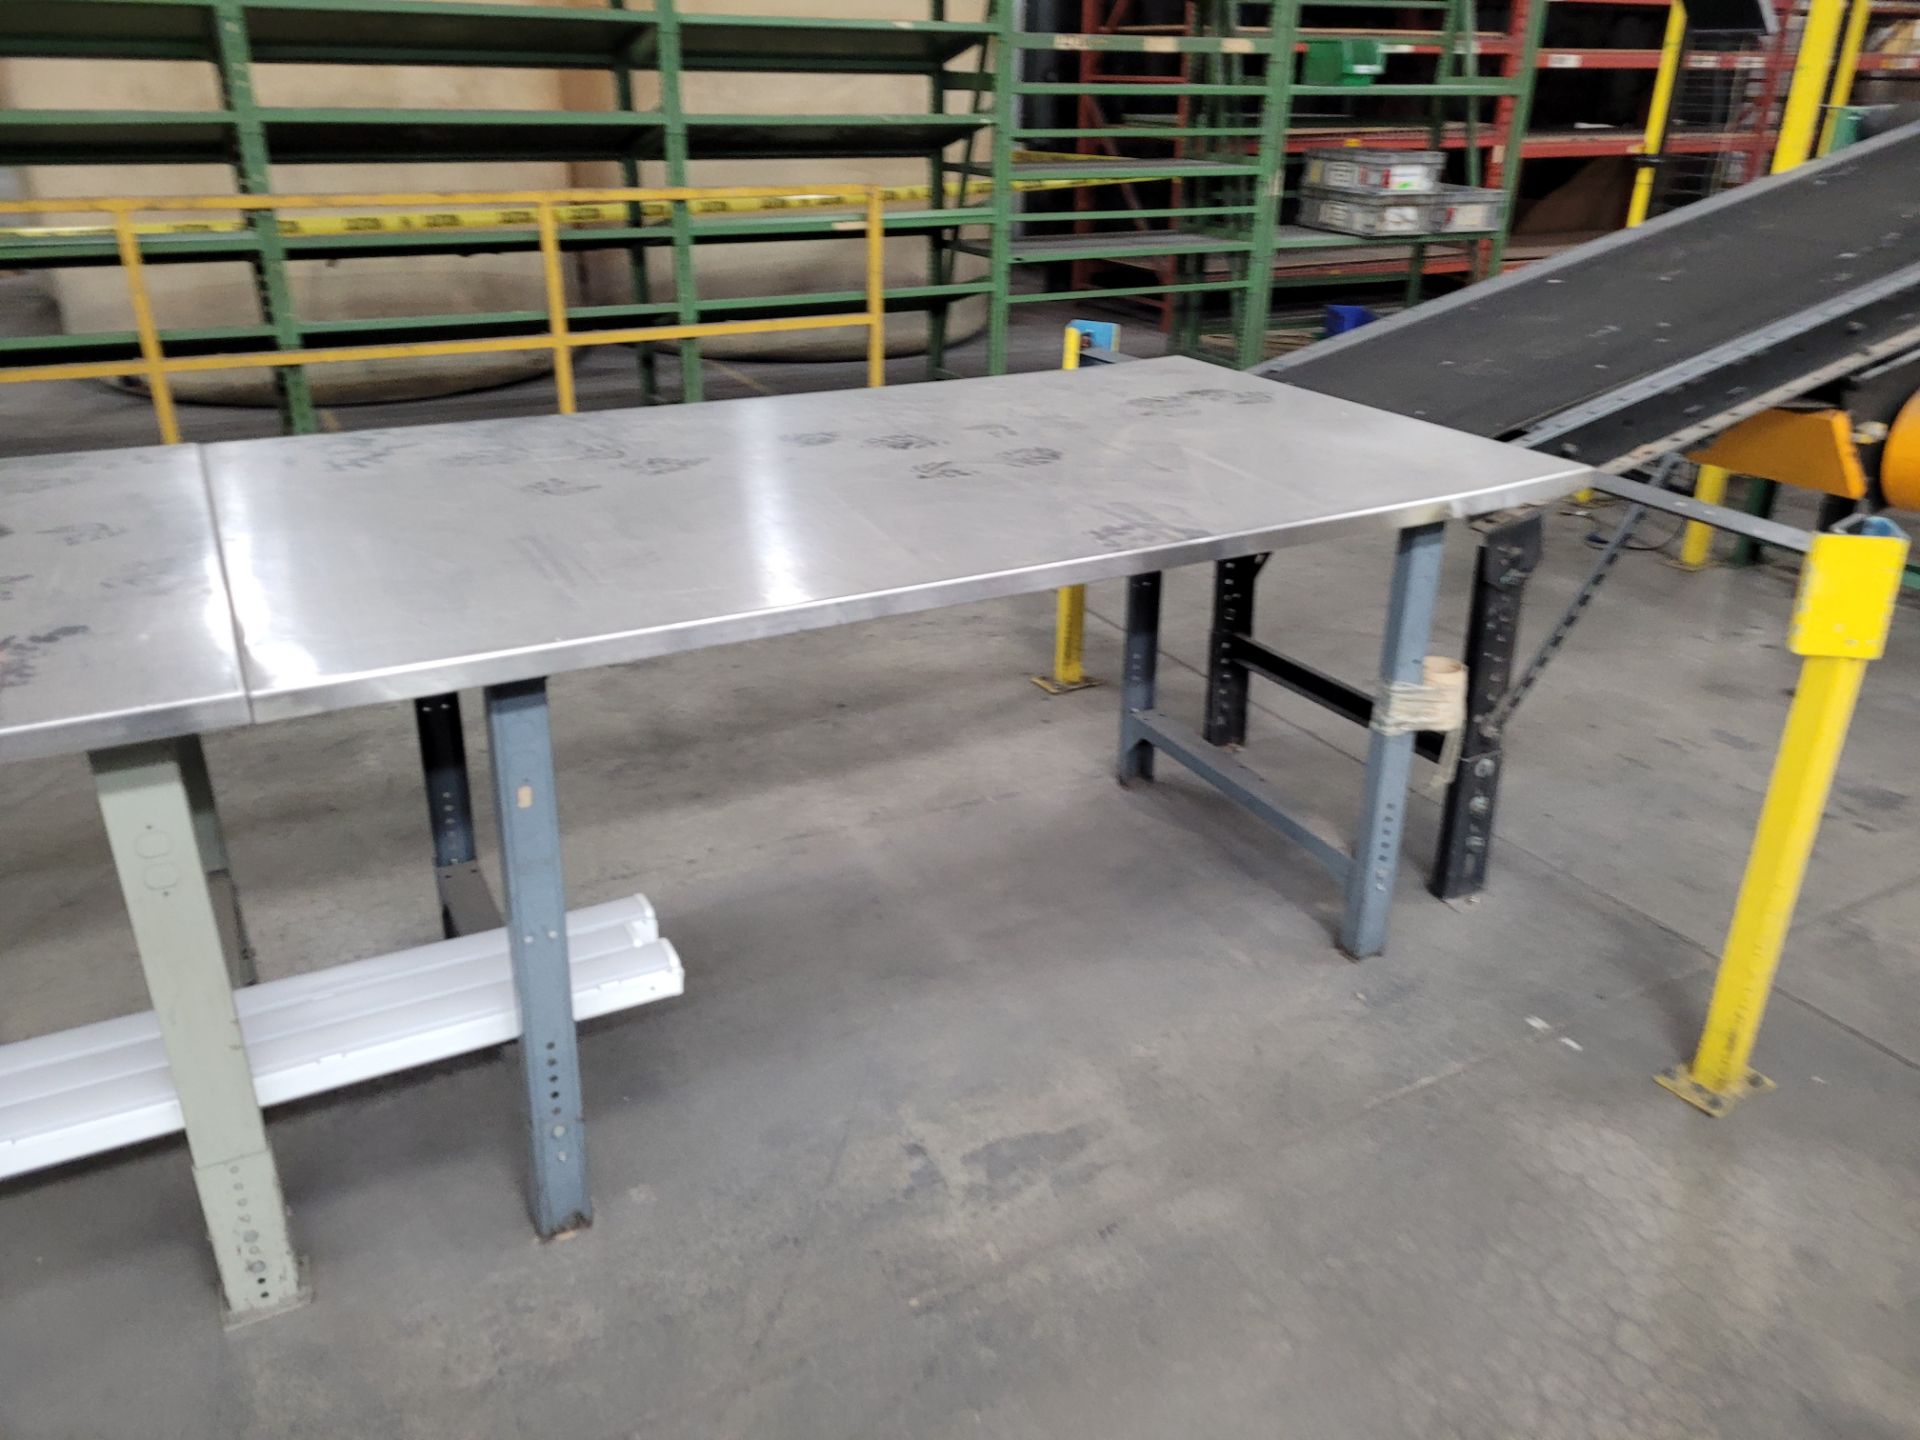 Lot of (3) stainless steel worktables, bolted together, metal bases - Image 2 of 4